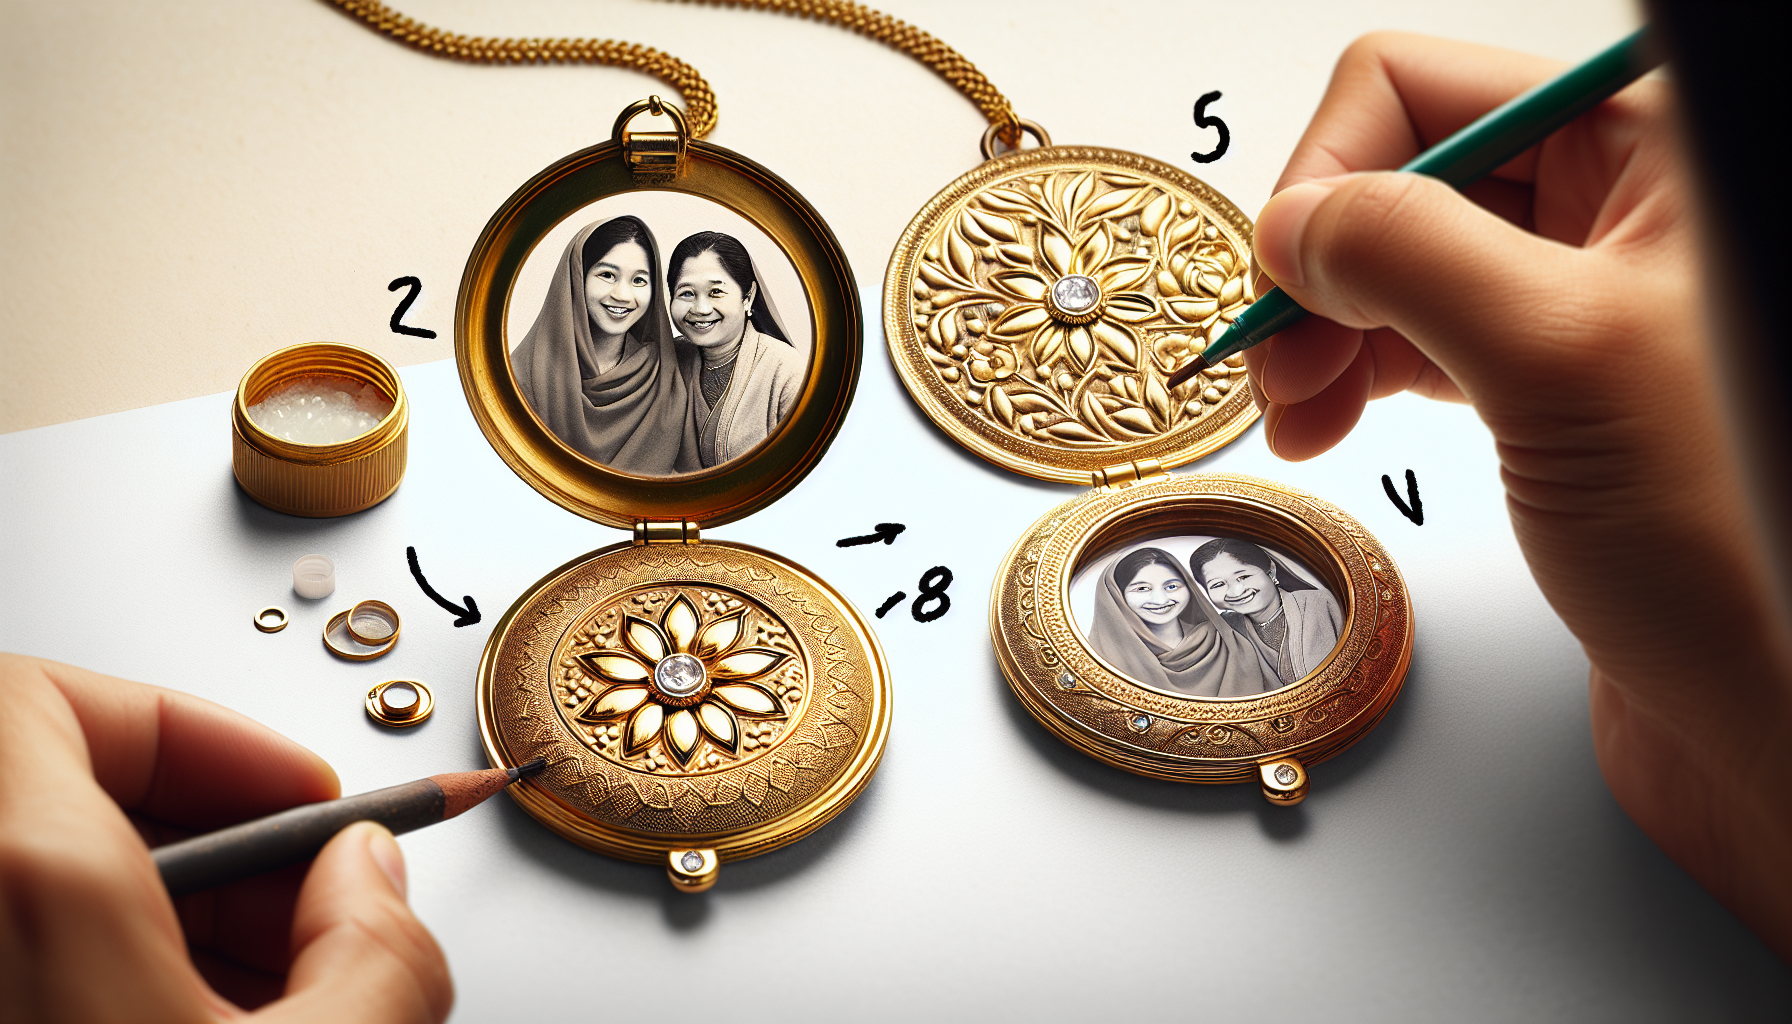 Visualize the process of creating and customizing a gold picture locket. The steps should start from a blank round locket. The locket is being adorned with intricate floral patterns and small precious